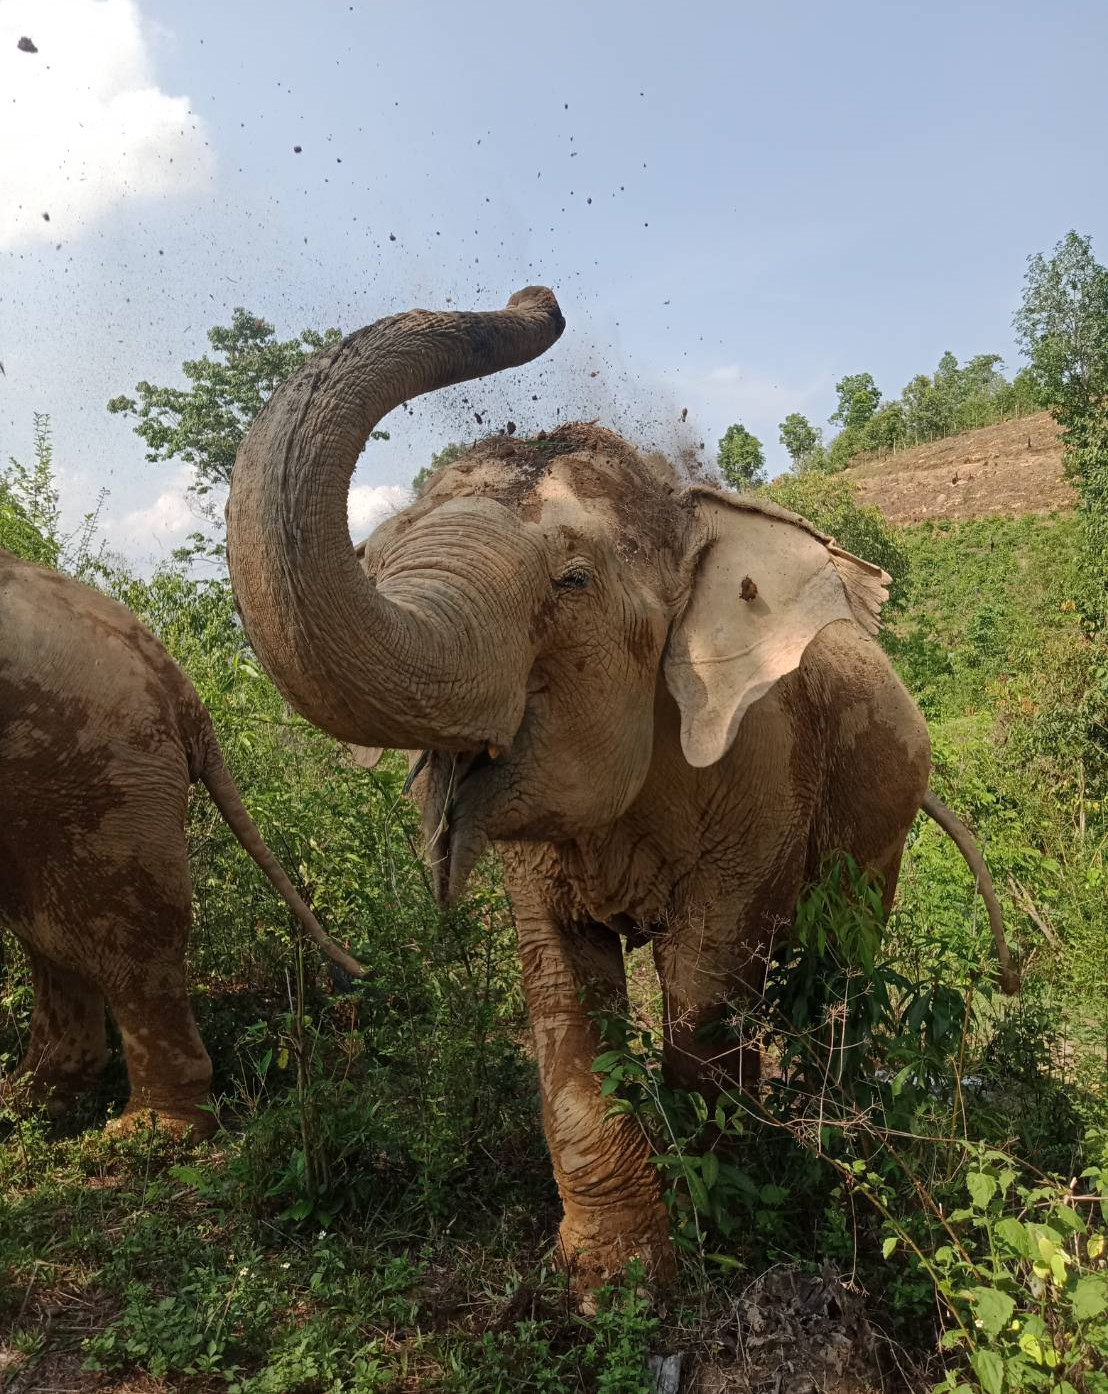 A rescued elephant in sanctuary